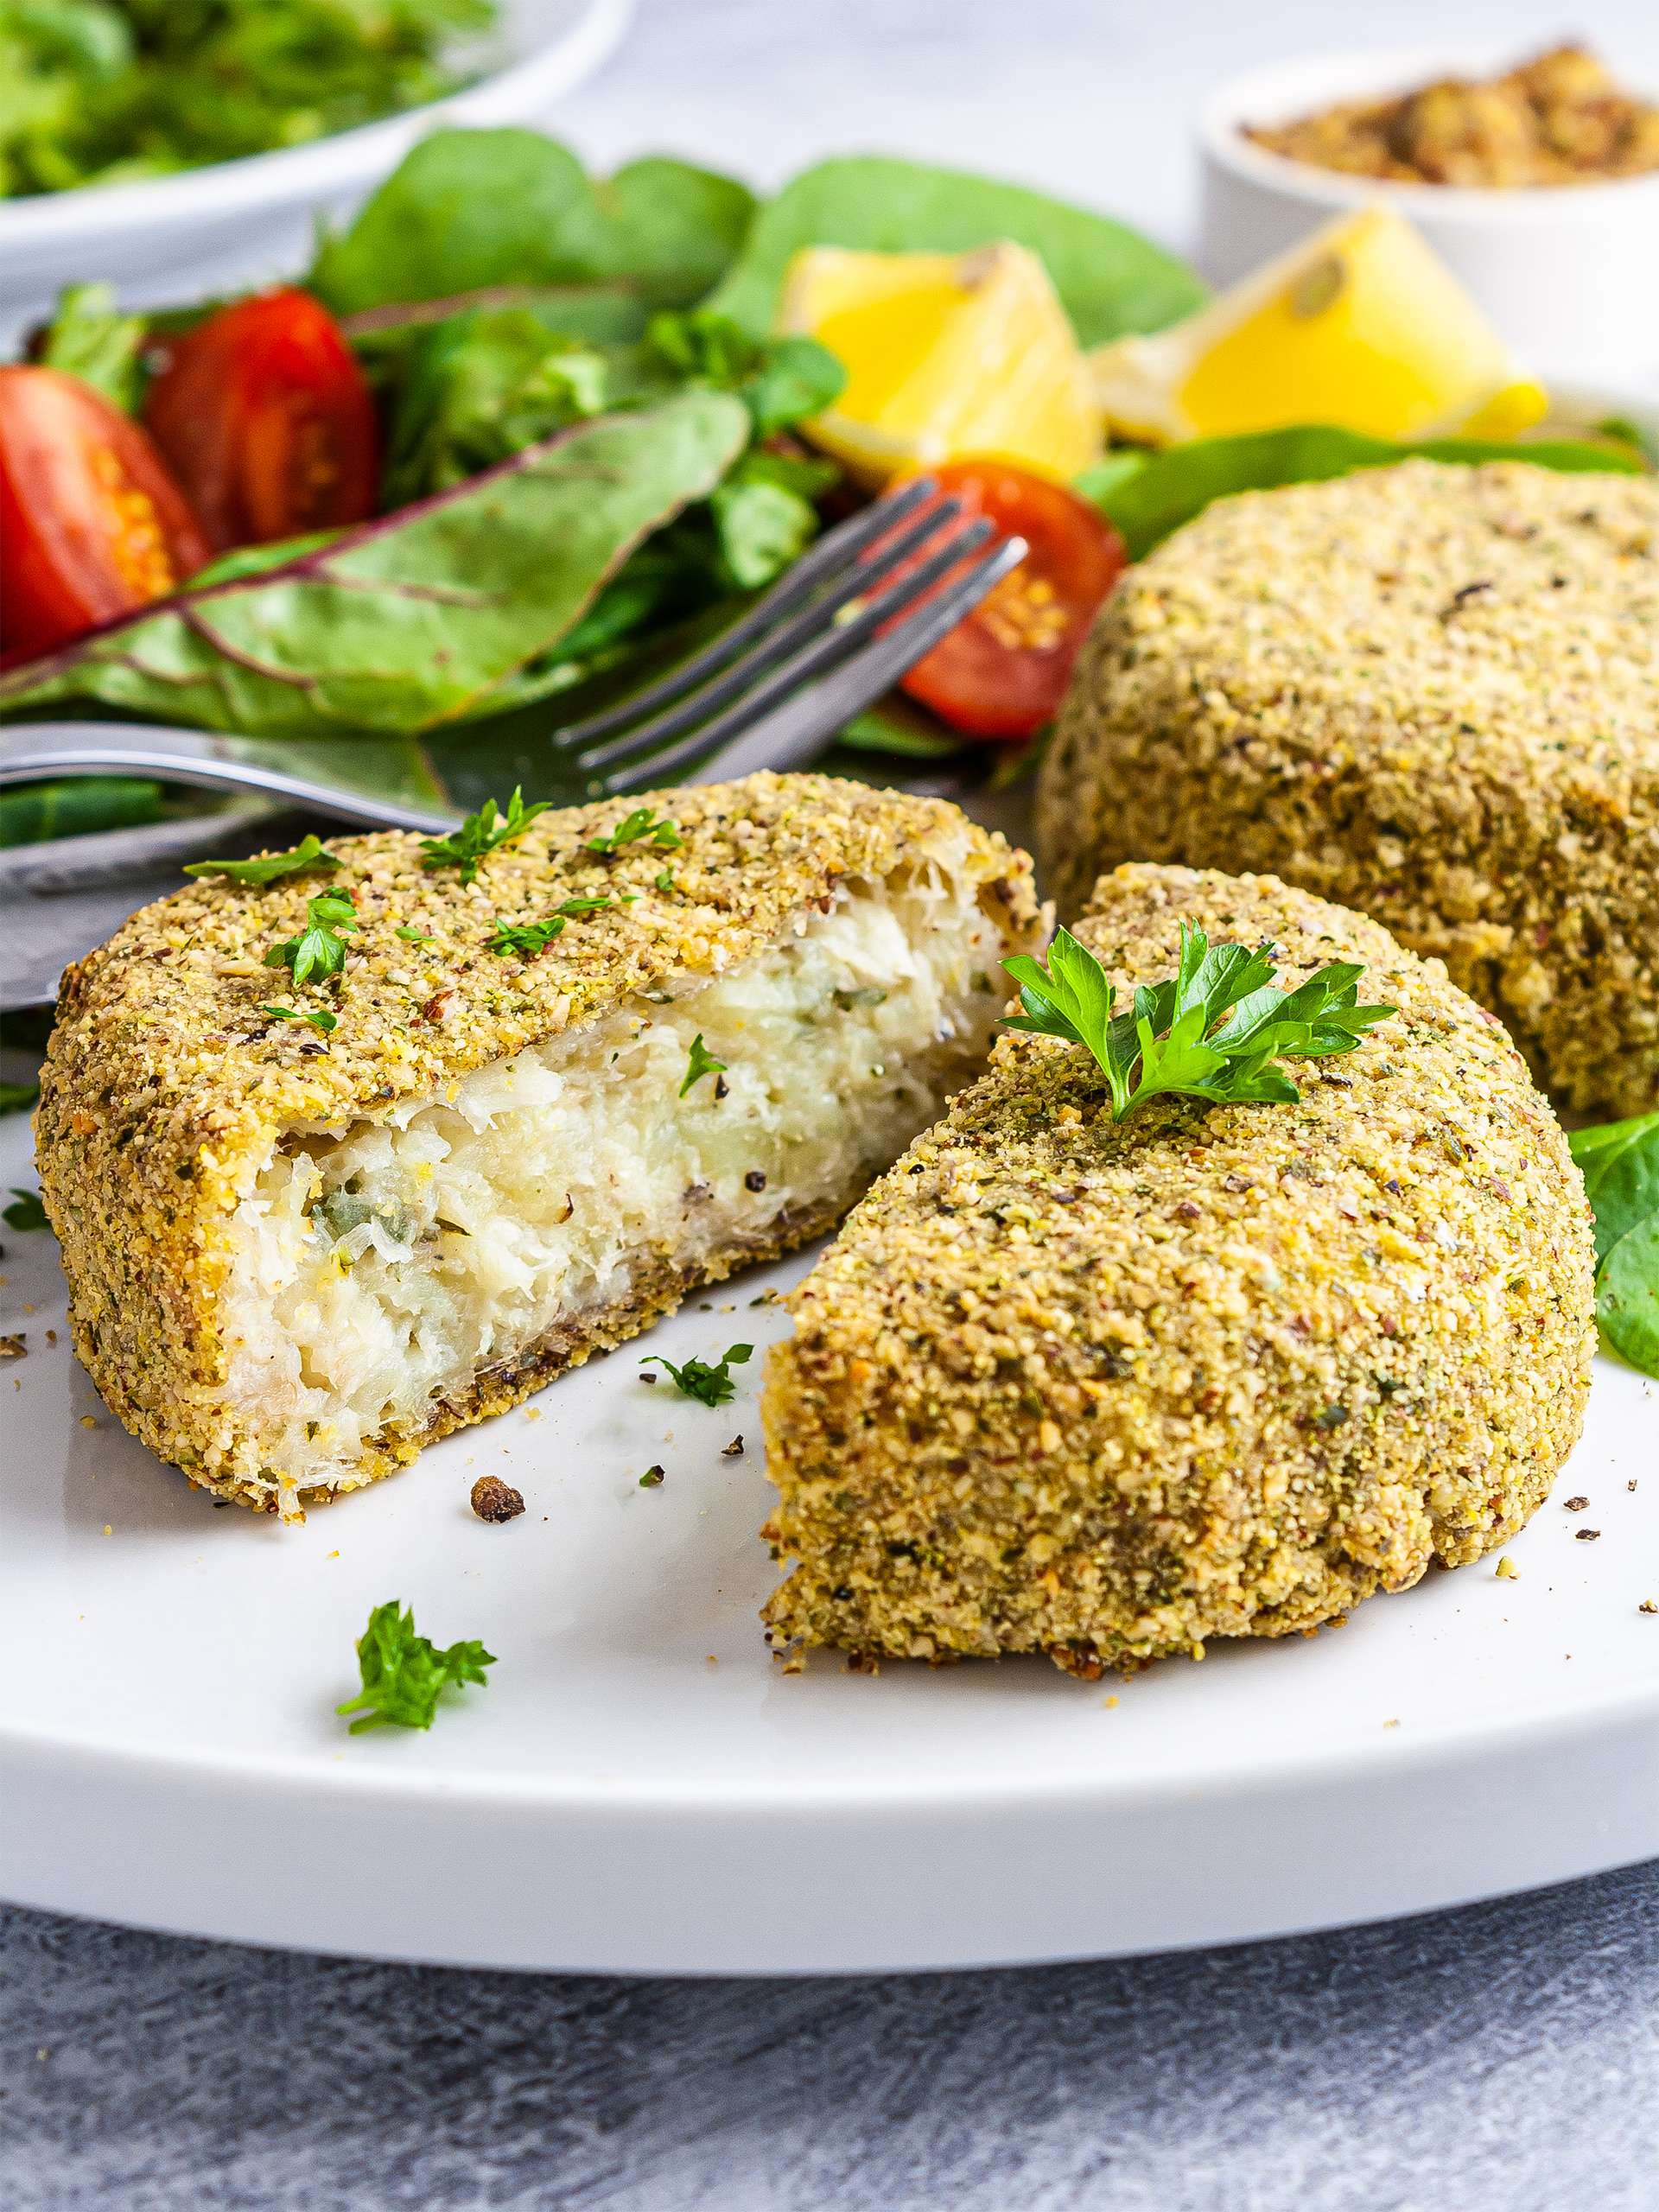 Gluten-Free Oven-Baked Fish Cakes Recipe | Foodaciously